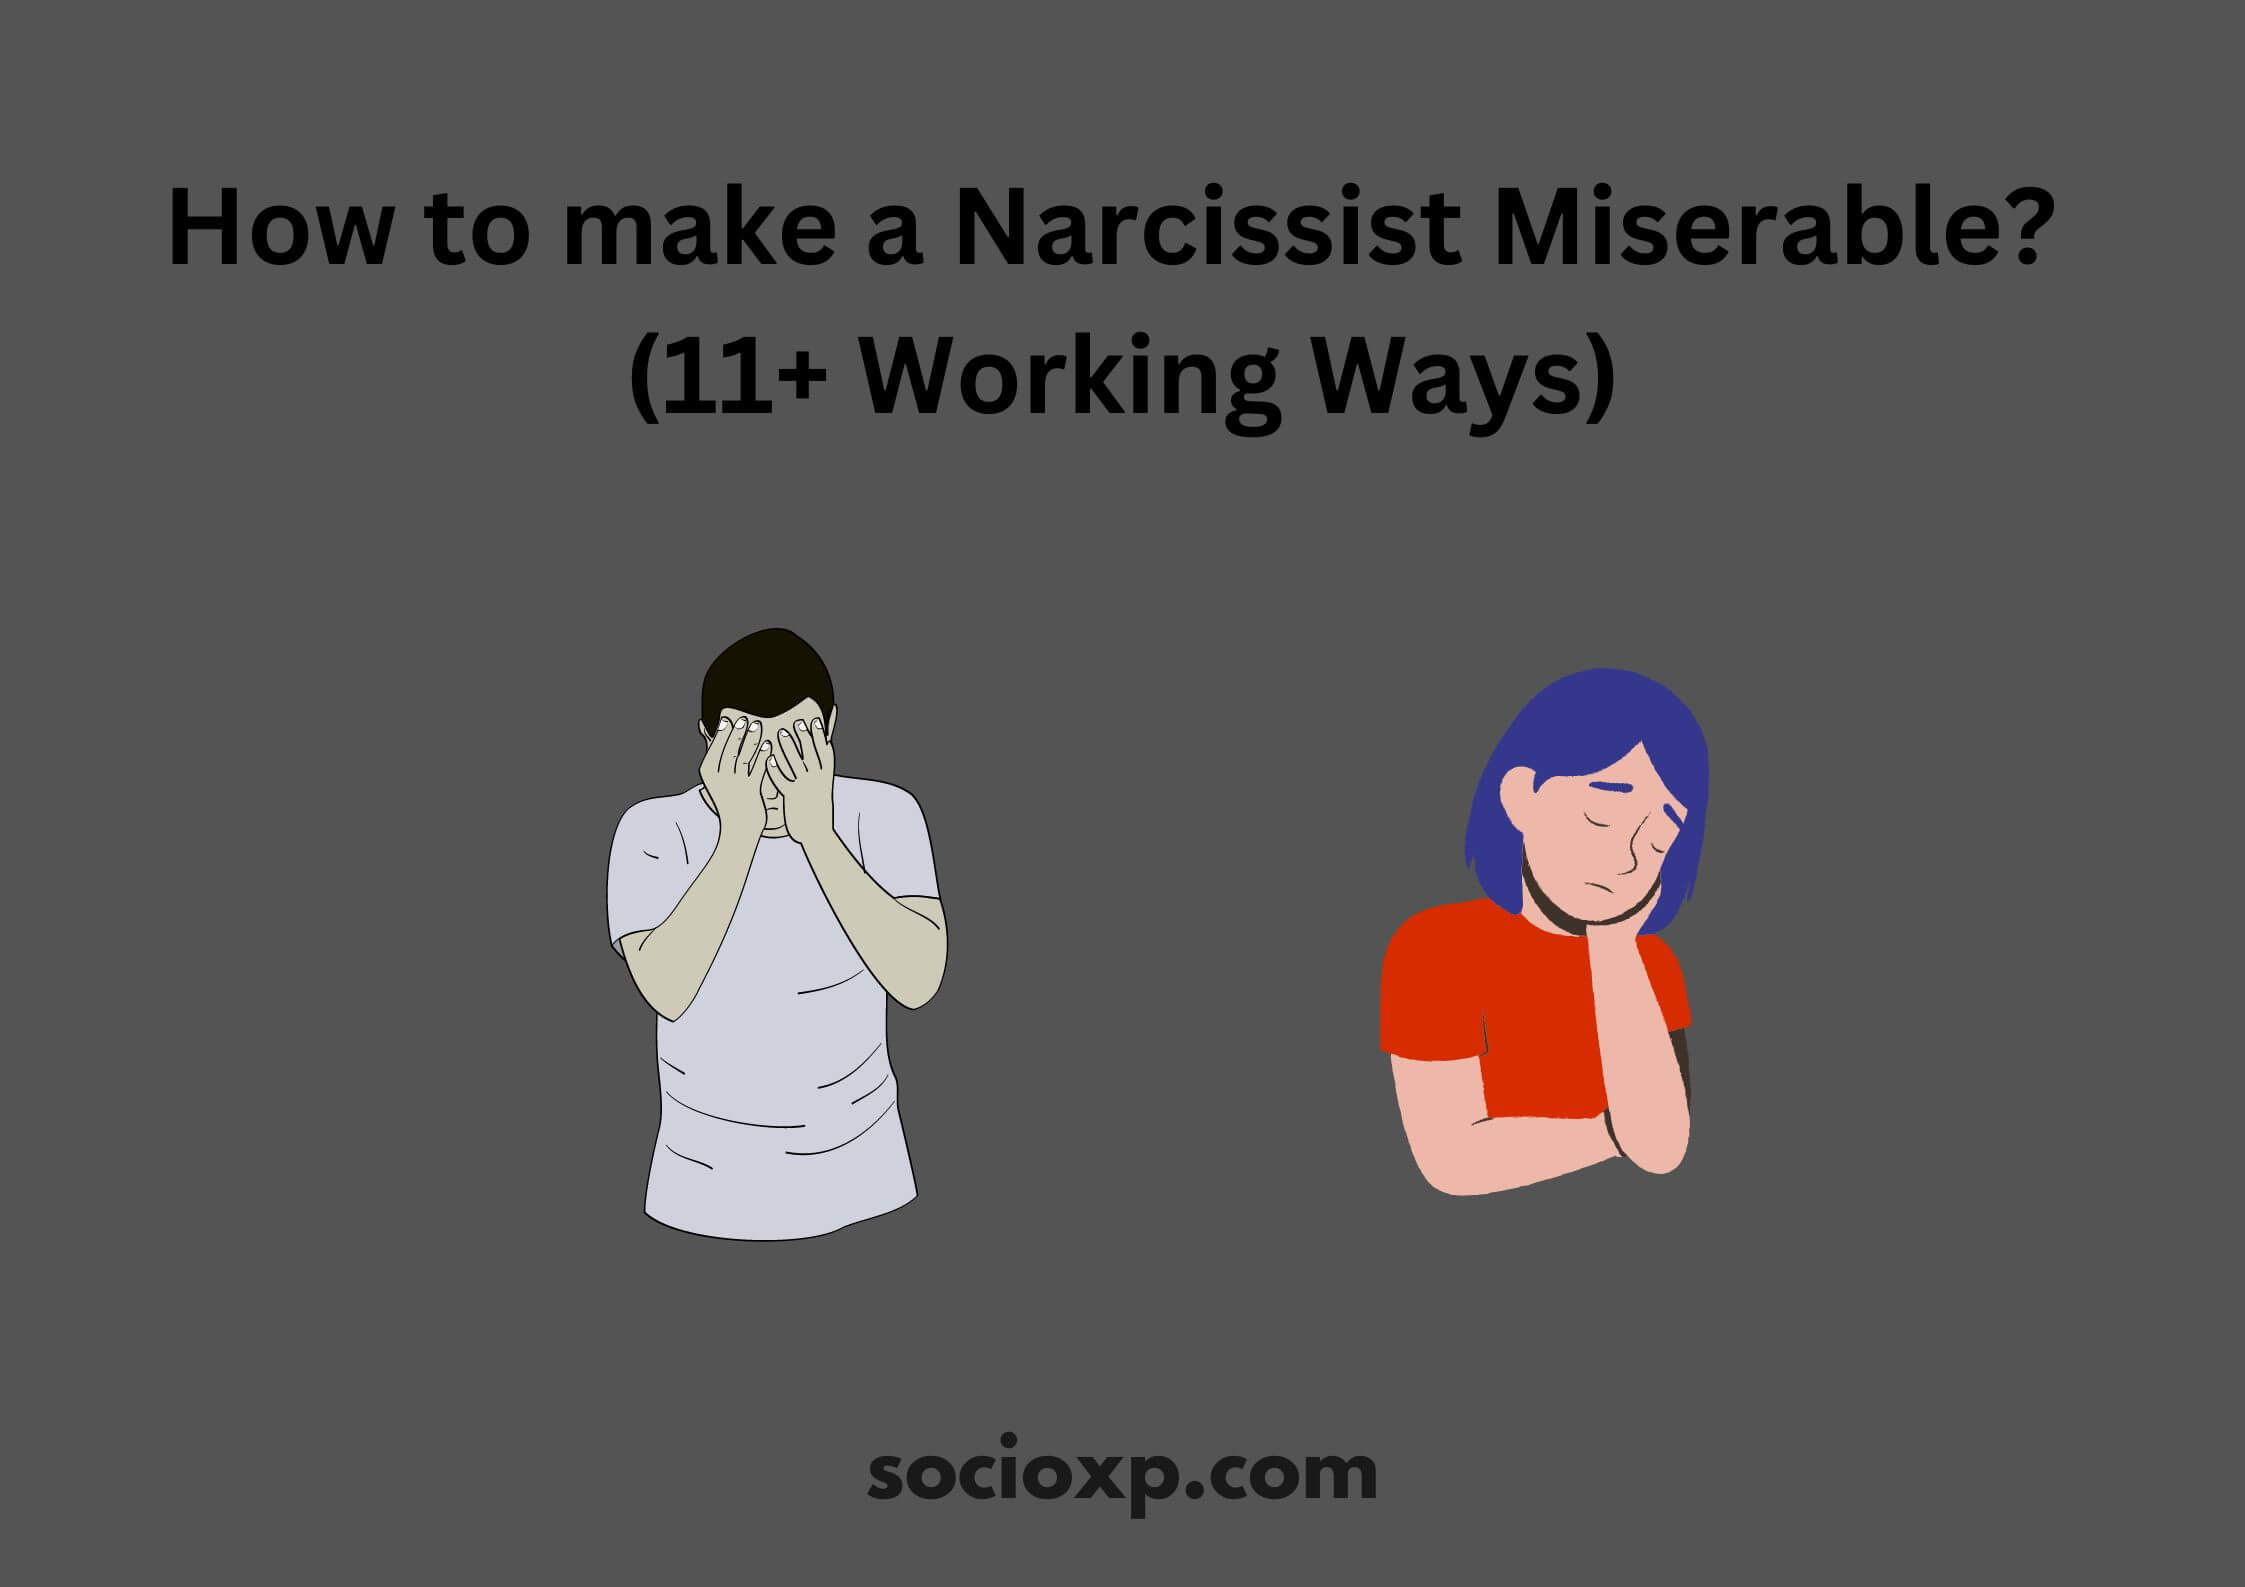 How To Make a Narcissist Miserable? (11+ Working Ways)